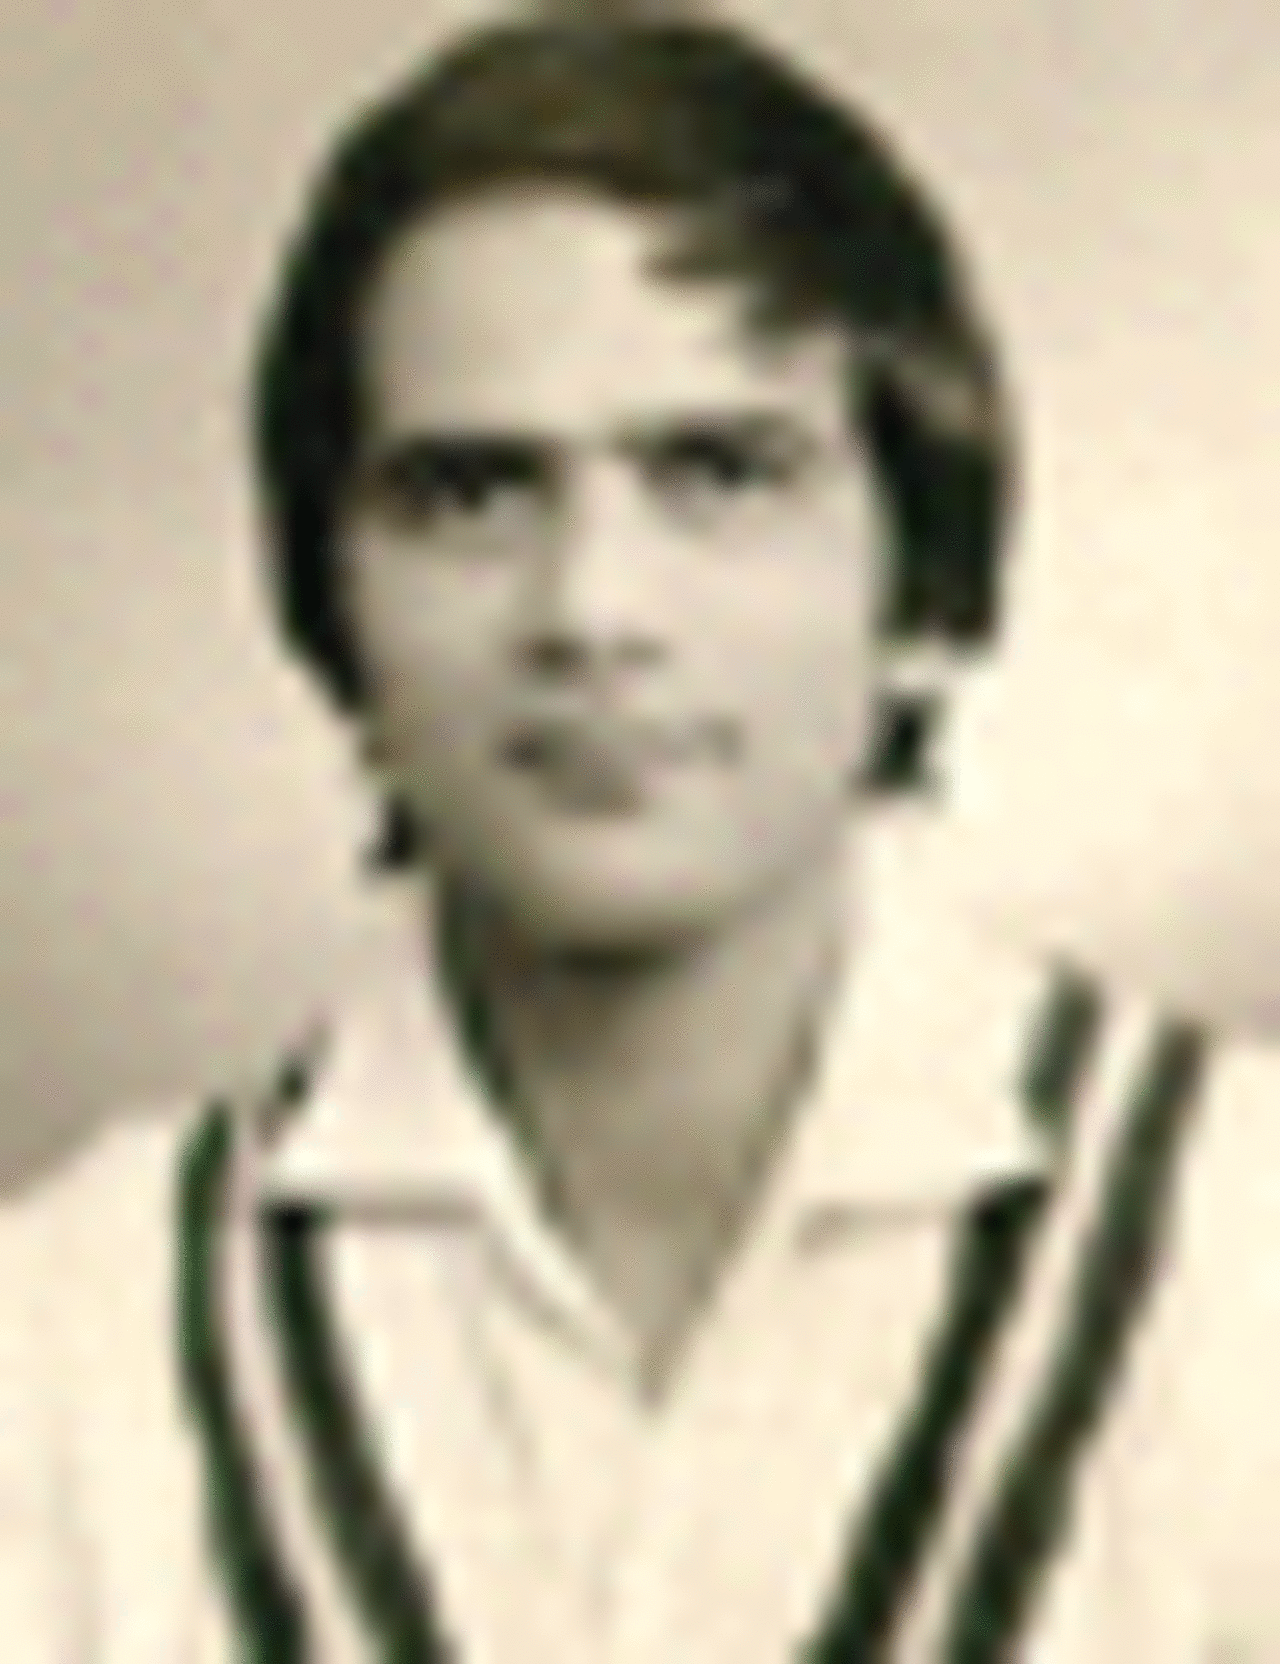 One of Pakistans top left arm spinners and all-rounder who played his debut match against West Indies at Barbados 1957-58. Scored a century in England.